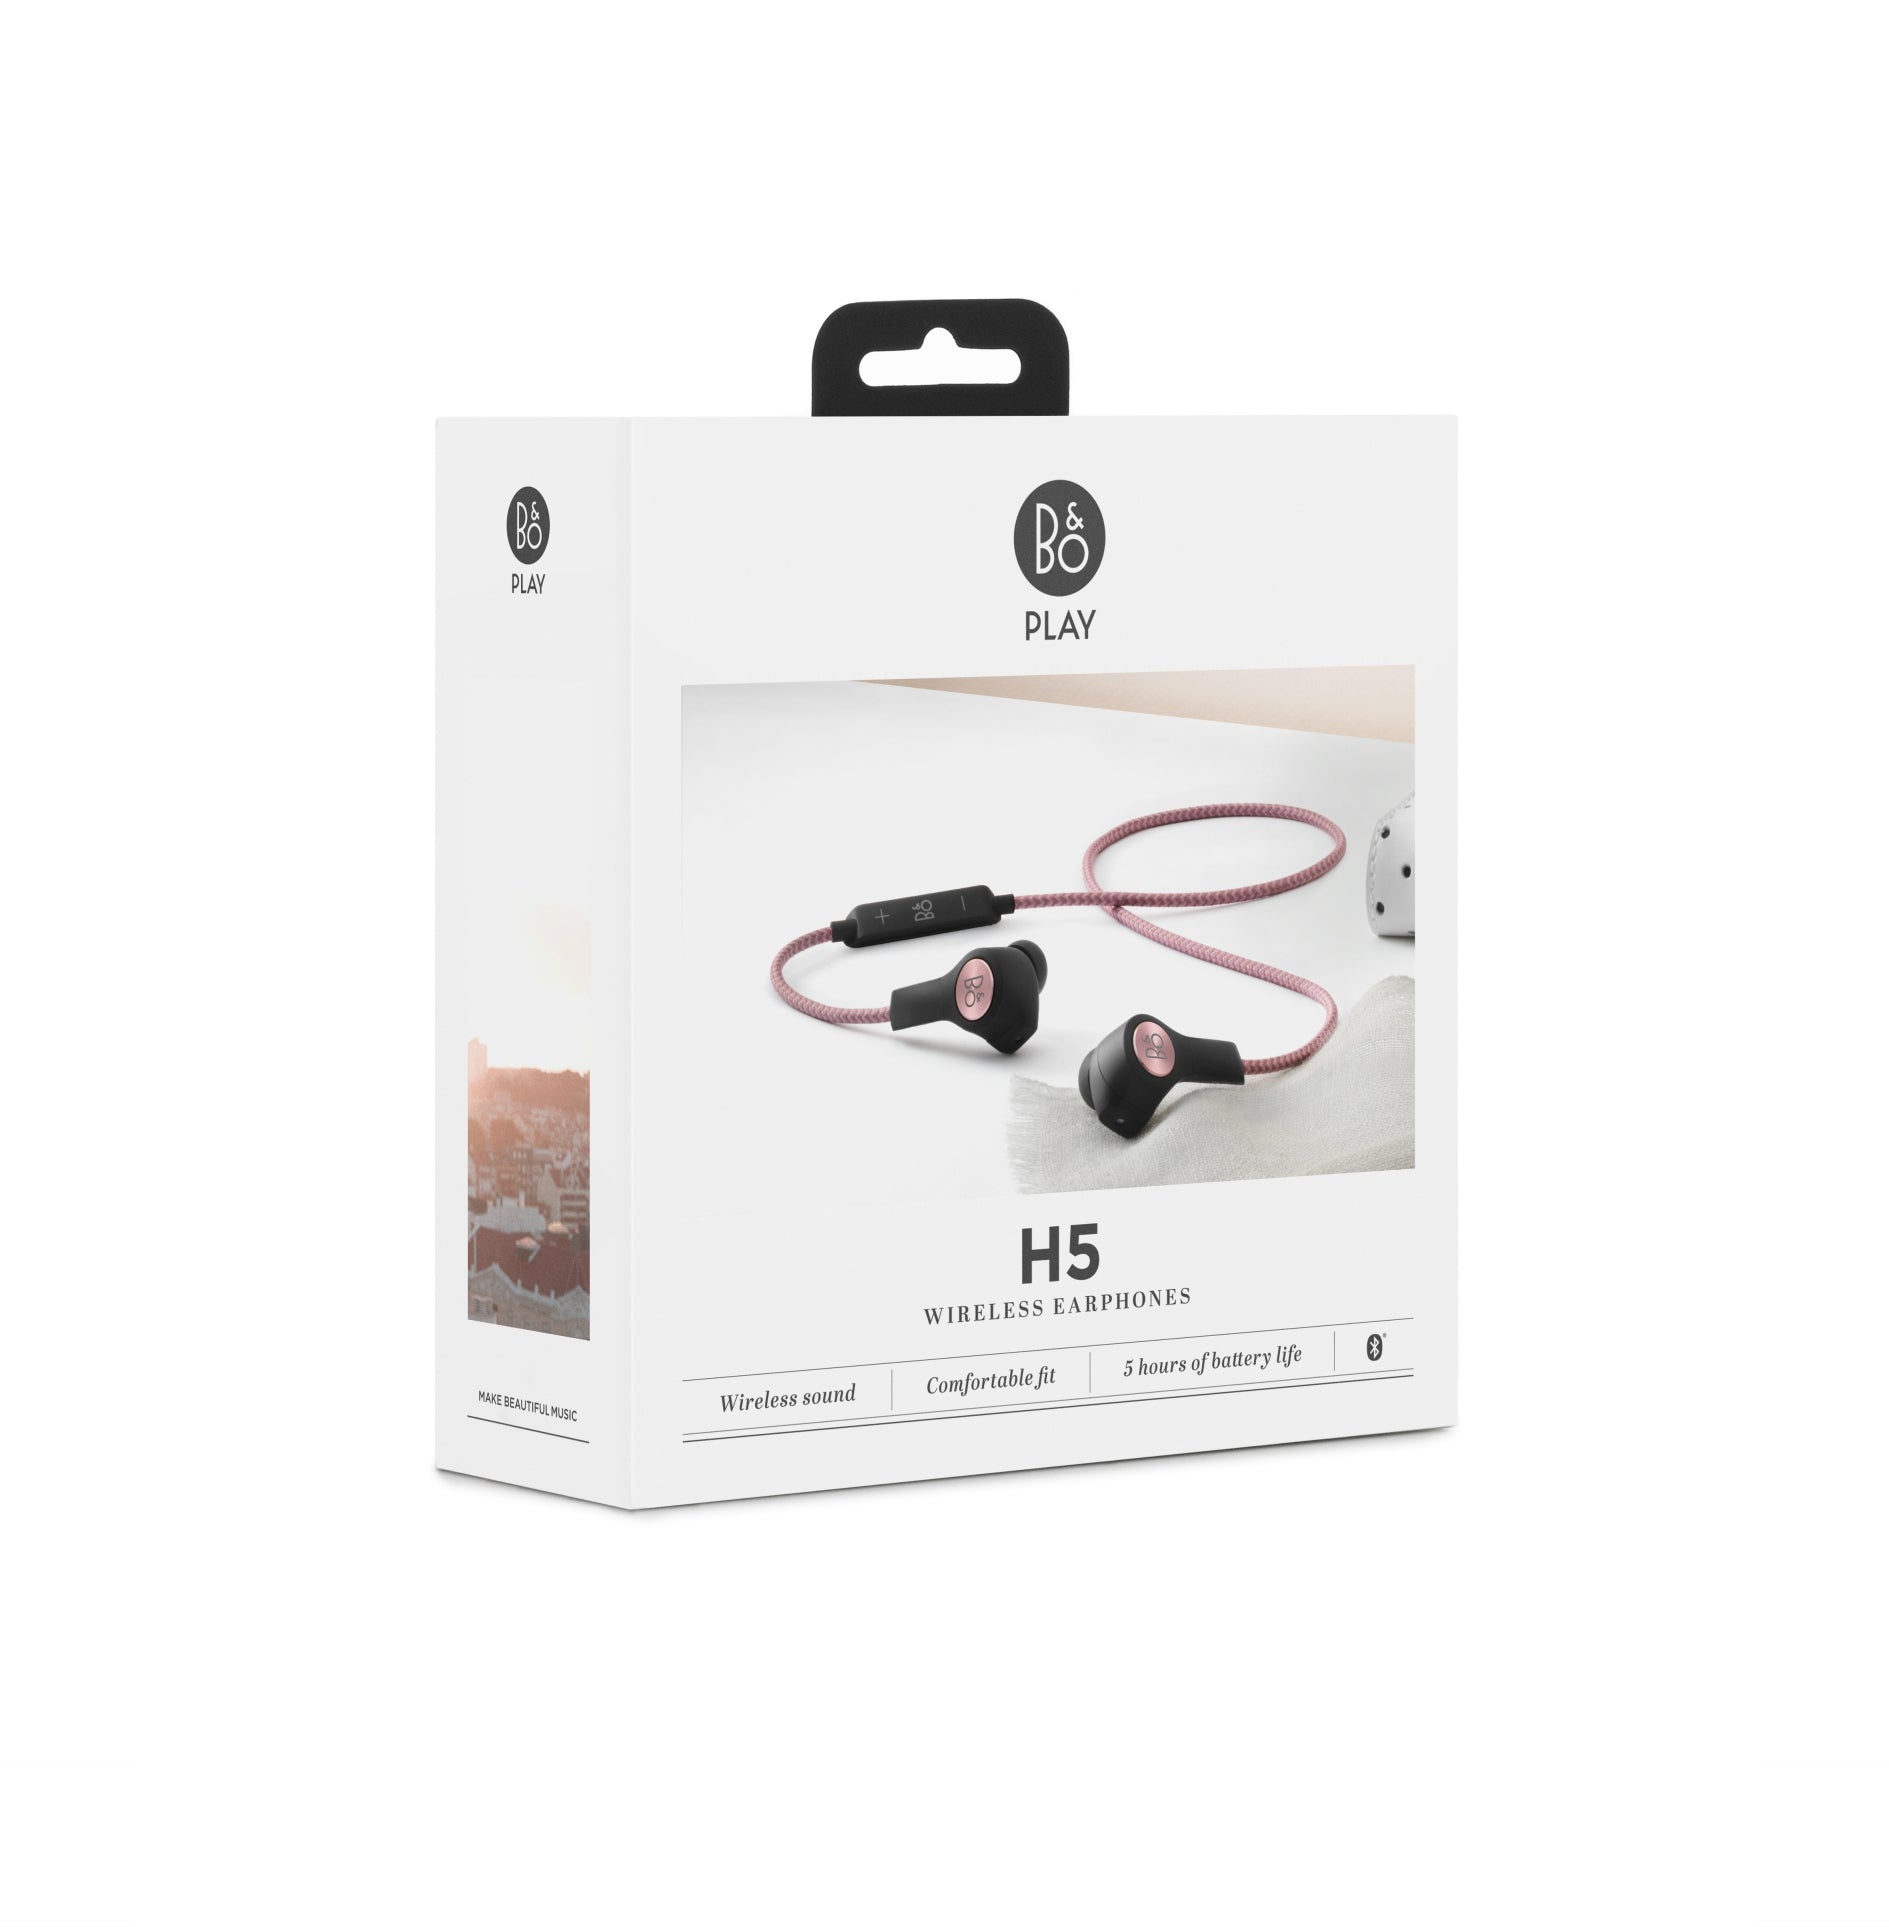 Bang & Olufsen Beoplay H5 Splash and Dust Proof Wireless Earphones rose box